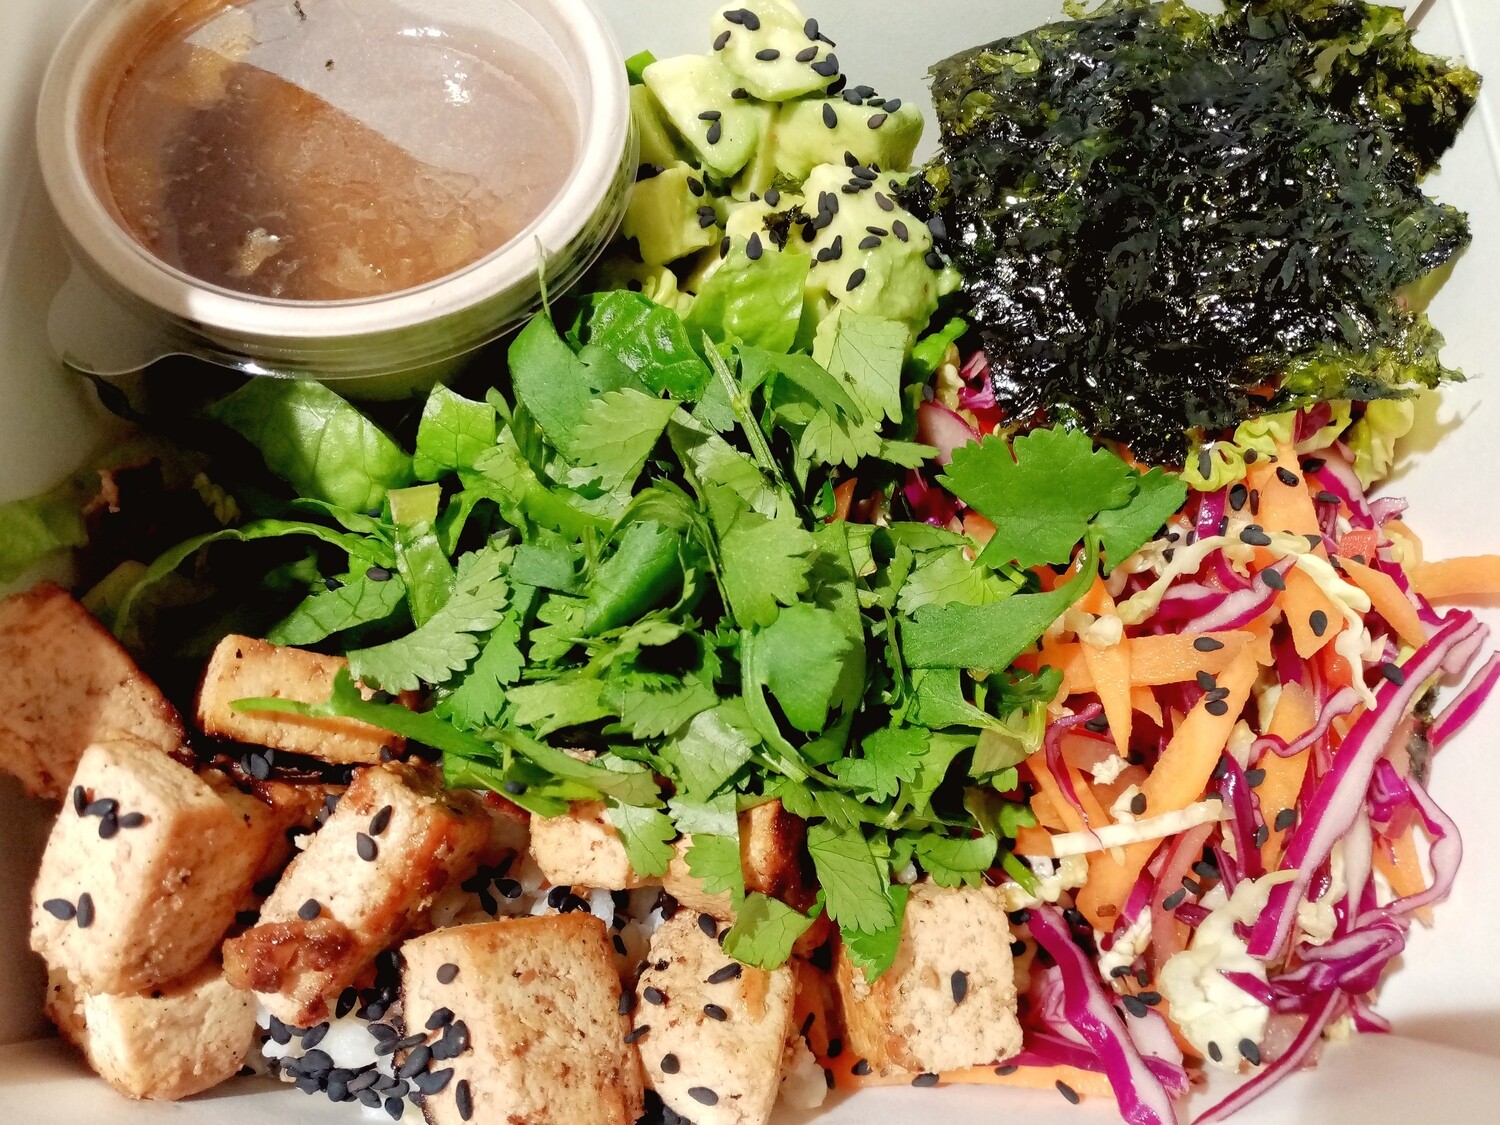 CHI BOX: Soba noodles, marinated red cabbage, cos lettuce, grated carrot, capsicum, avocado, panfried tofu, black sesame seeds, coriander. Your choice extras and vinnaigrette. DF